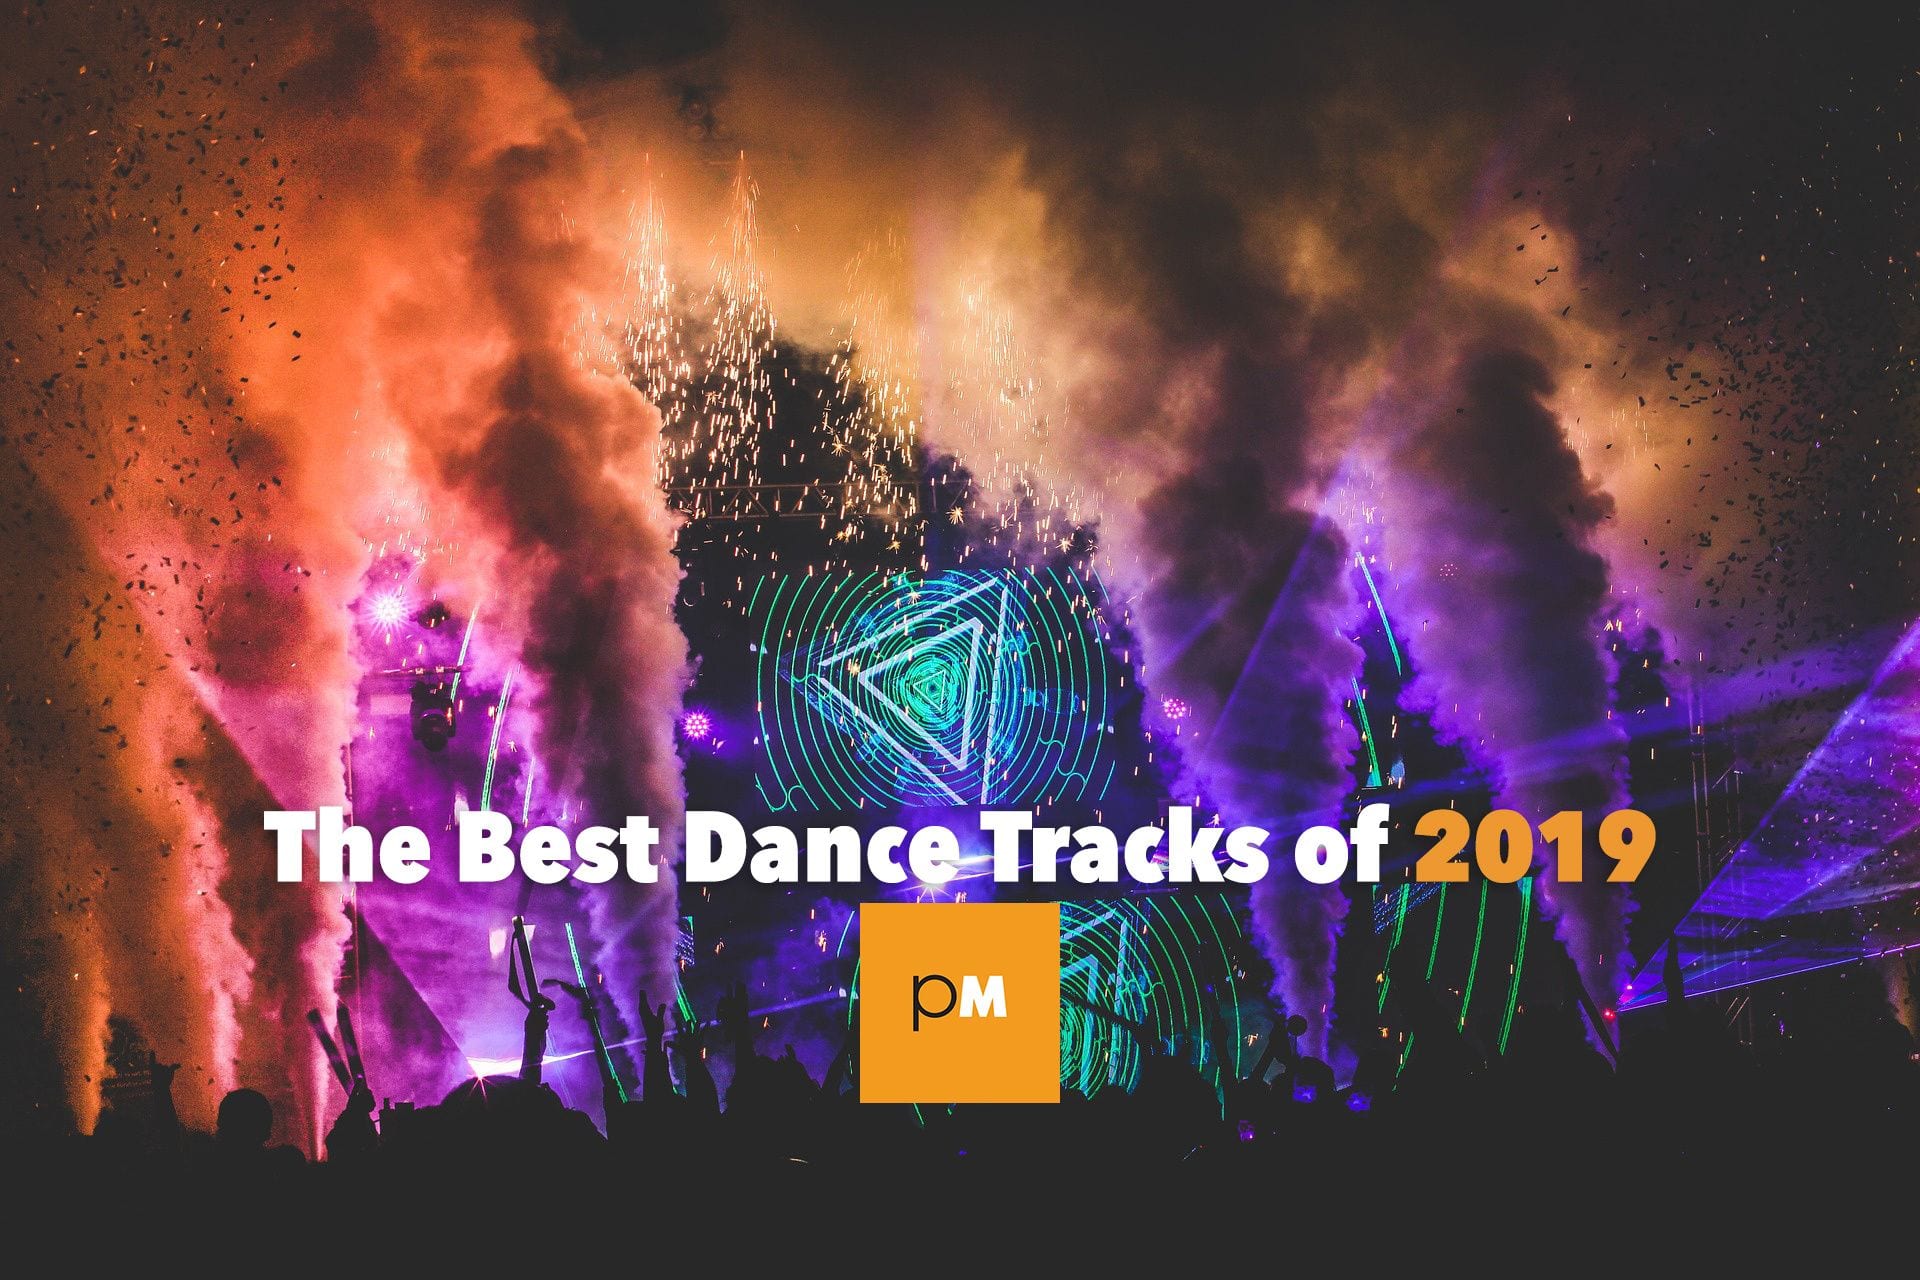 The Best Dance Tracks of 2019